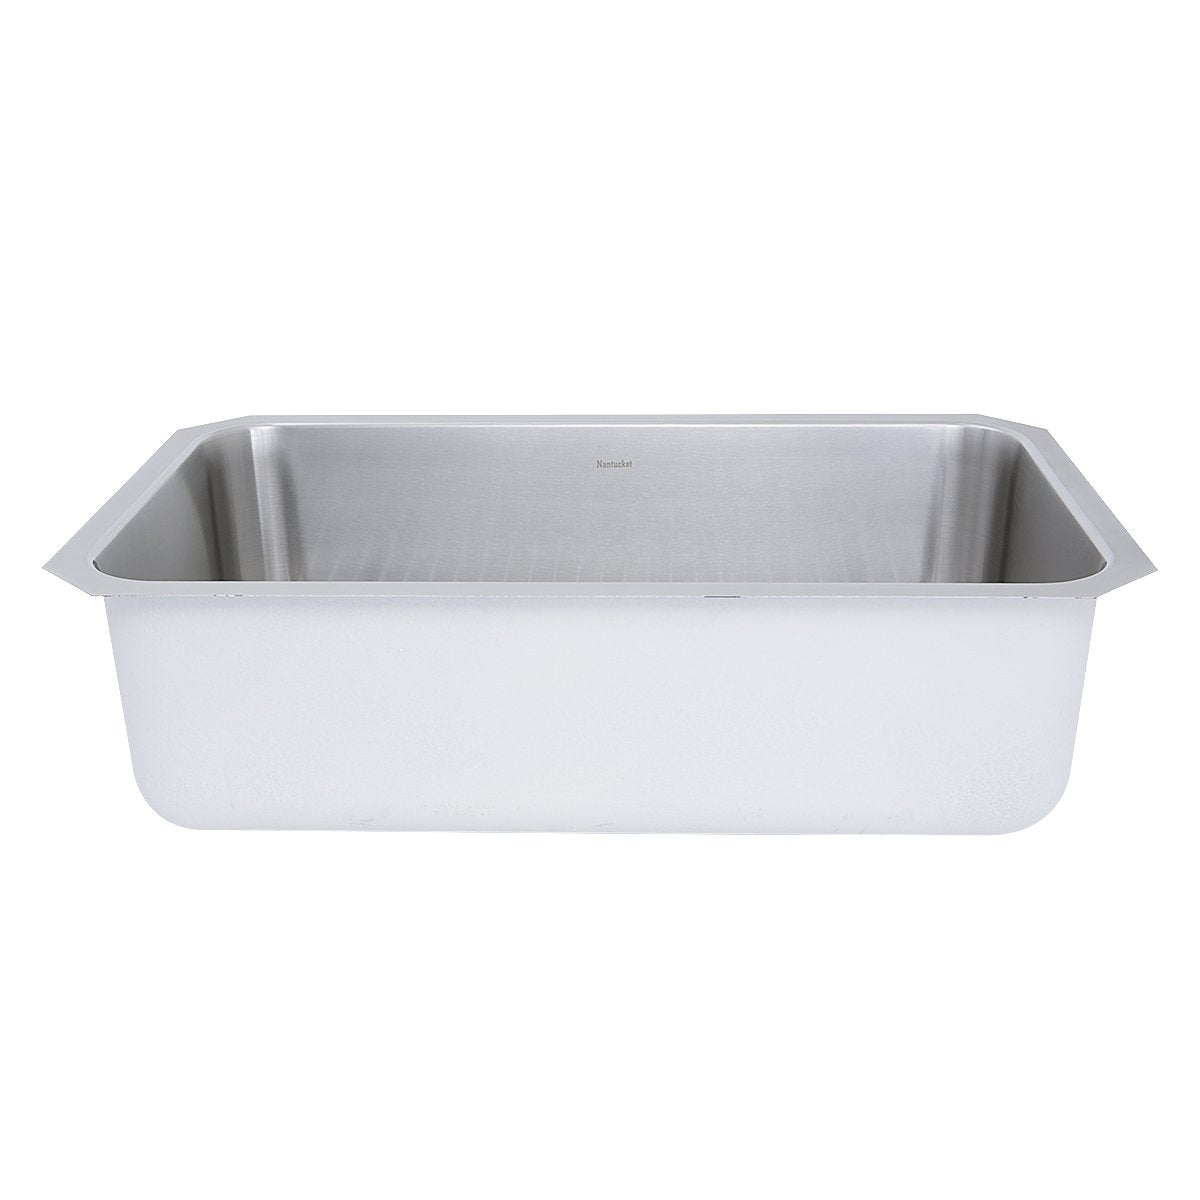 Nantucket 30" Large Rectangle Single Bowl Undermount Stainless Steel Kitchen Sink, 11 Inches Deep - NS43-11-16